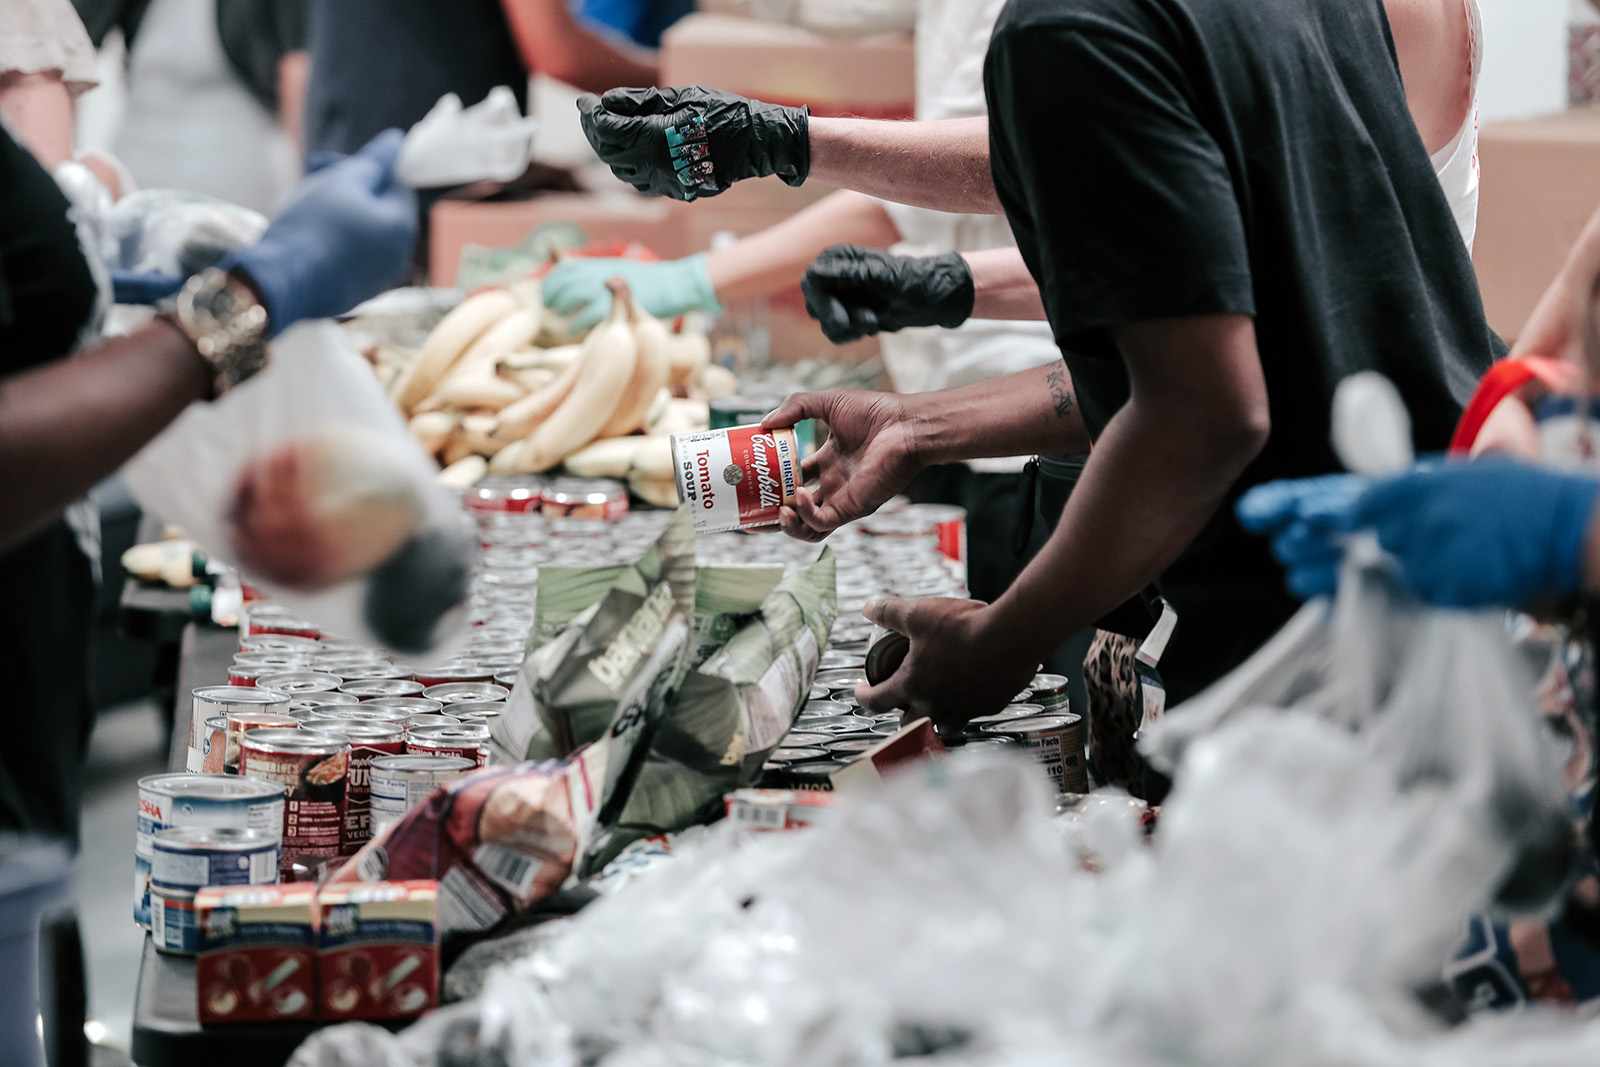 People work together organizing donations at a food bank. Photo by Joel Muniz/Unsplash/Creative Commons